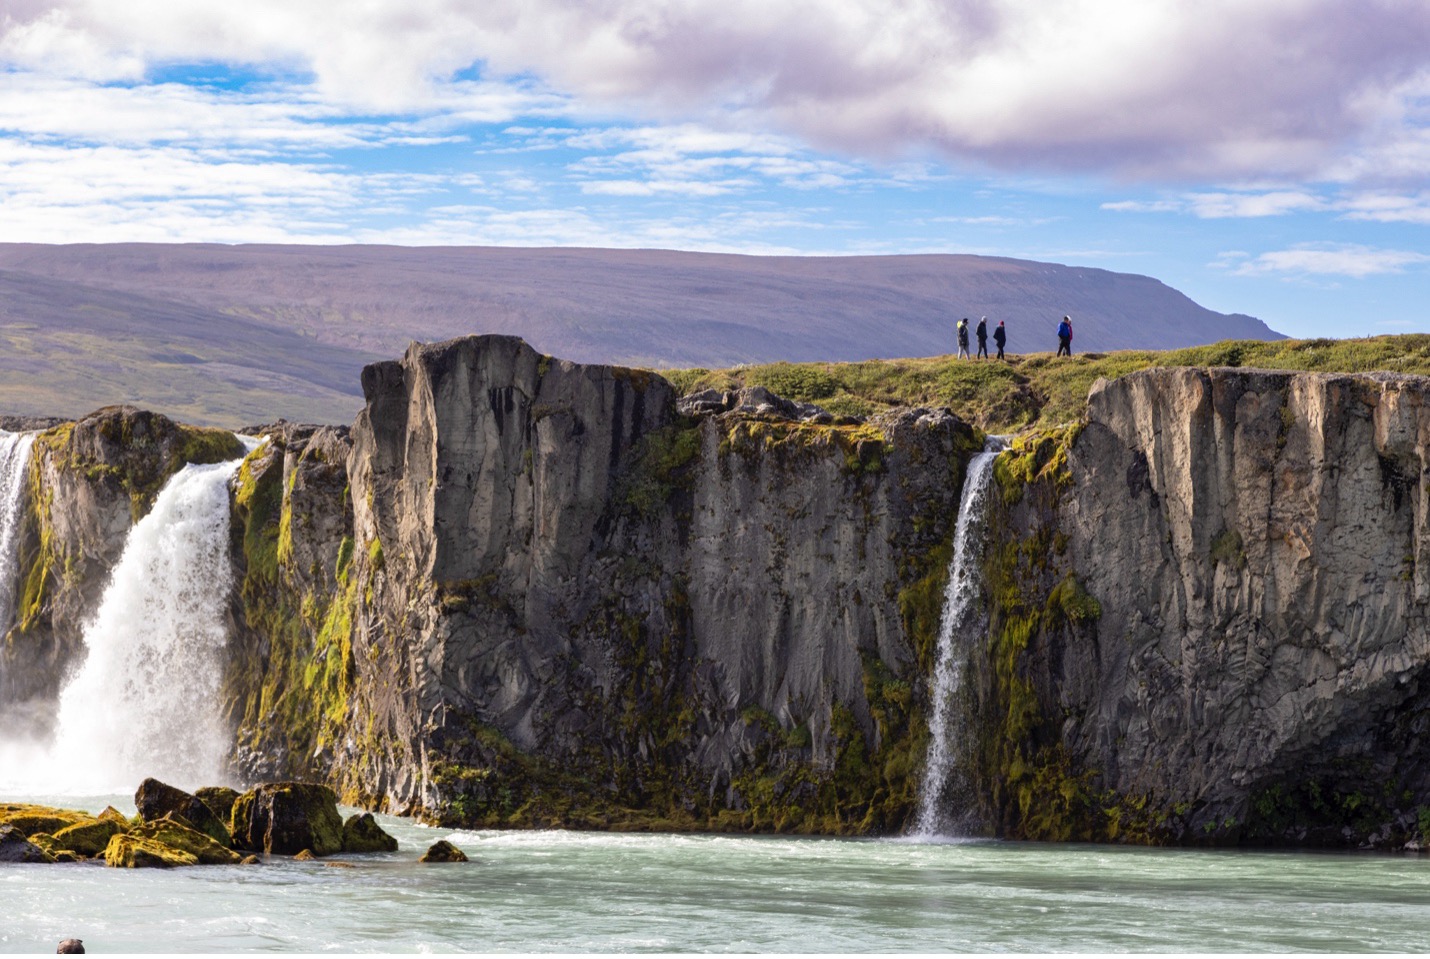 hikers walk a cliff on top of godafoss waterfall in iceland